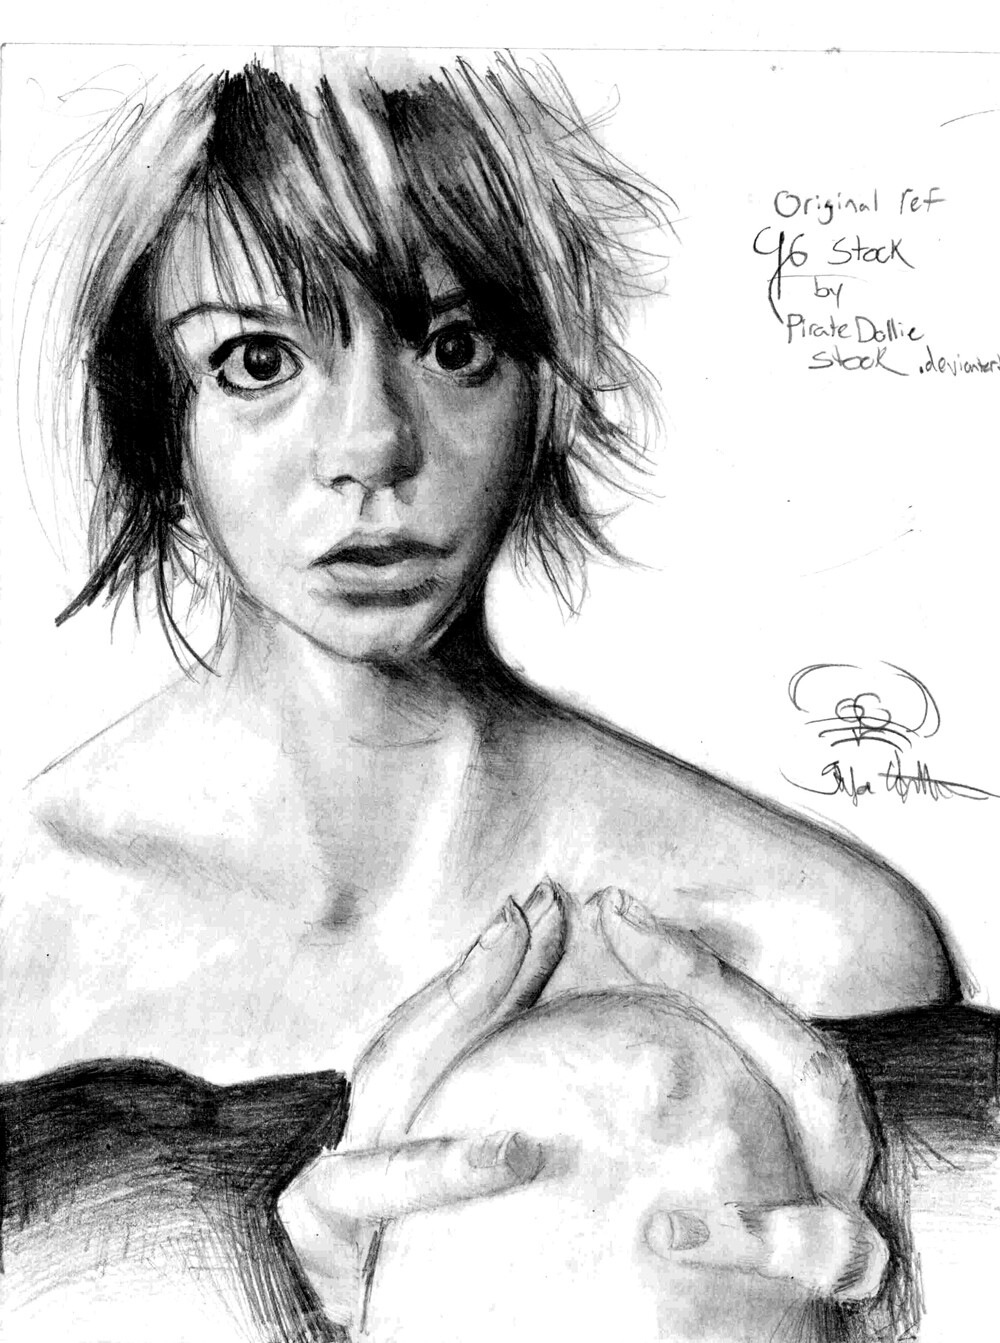 A pencil portrait I drew in High School, based off a stock model.